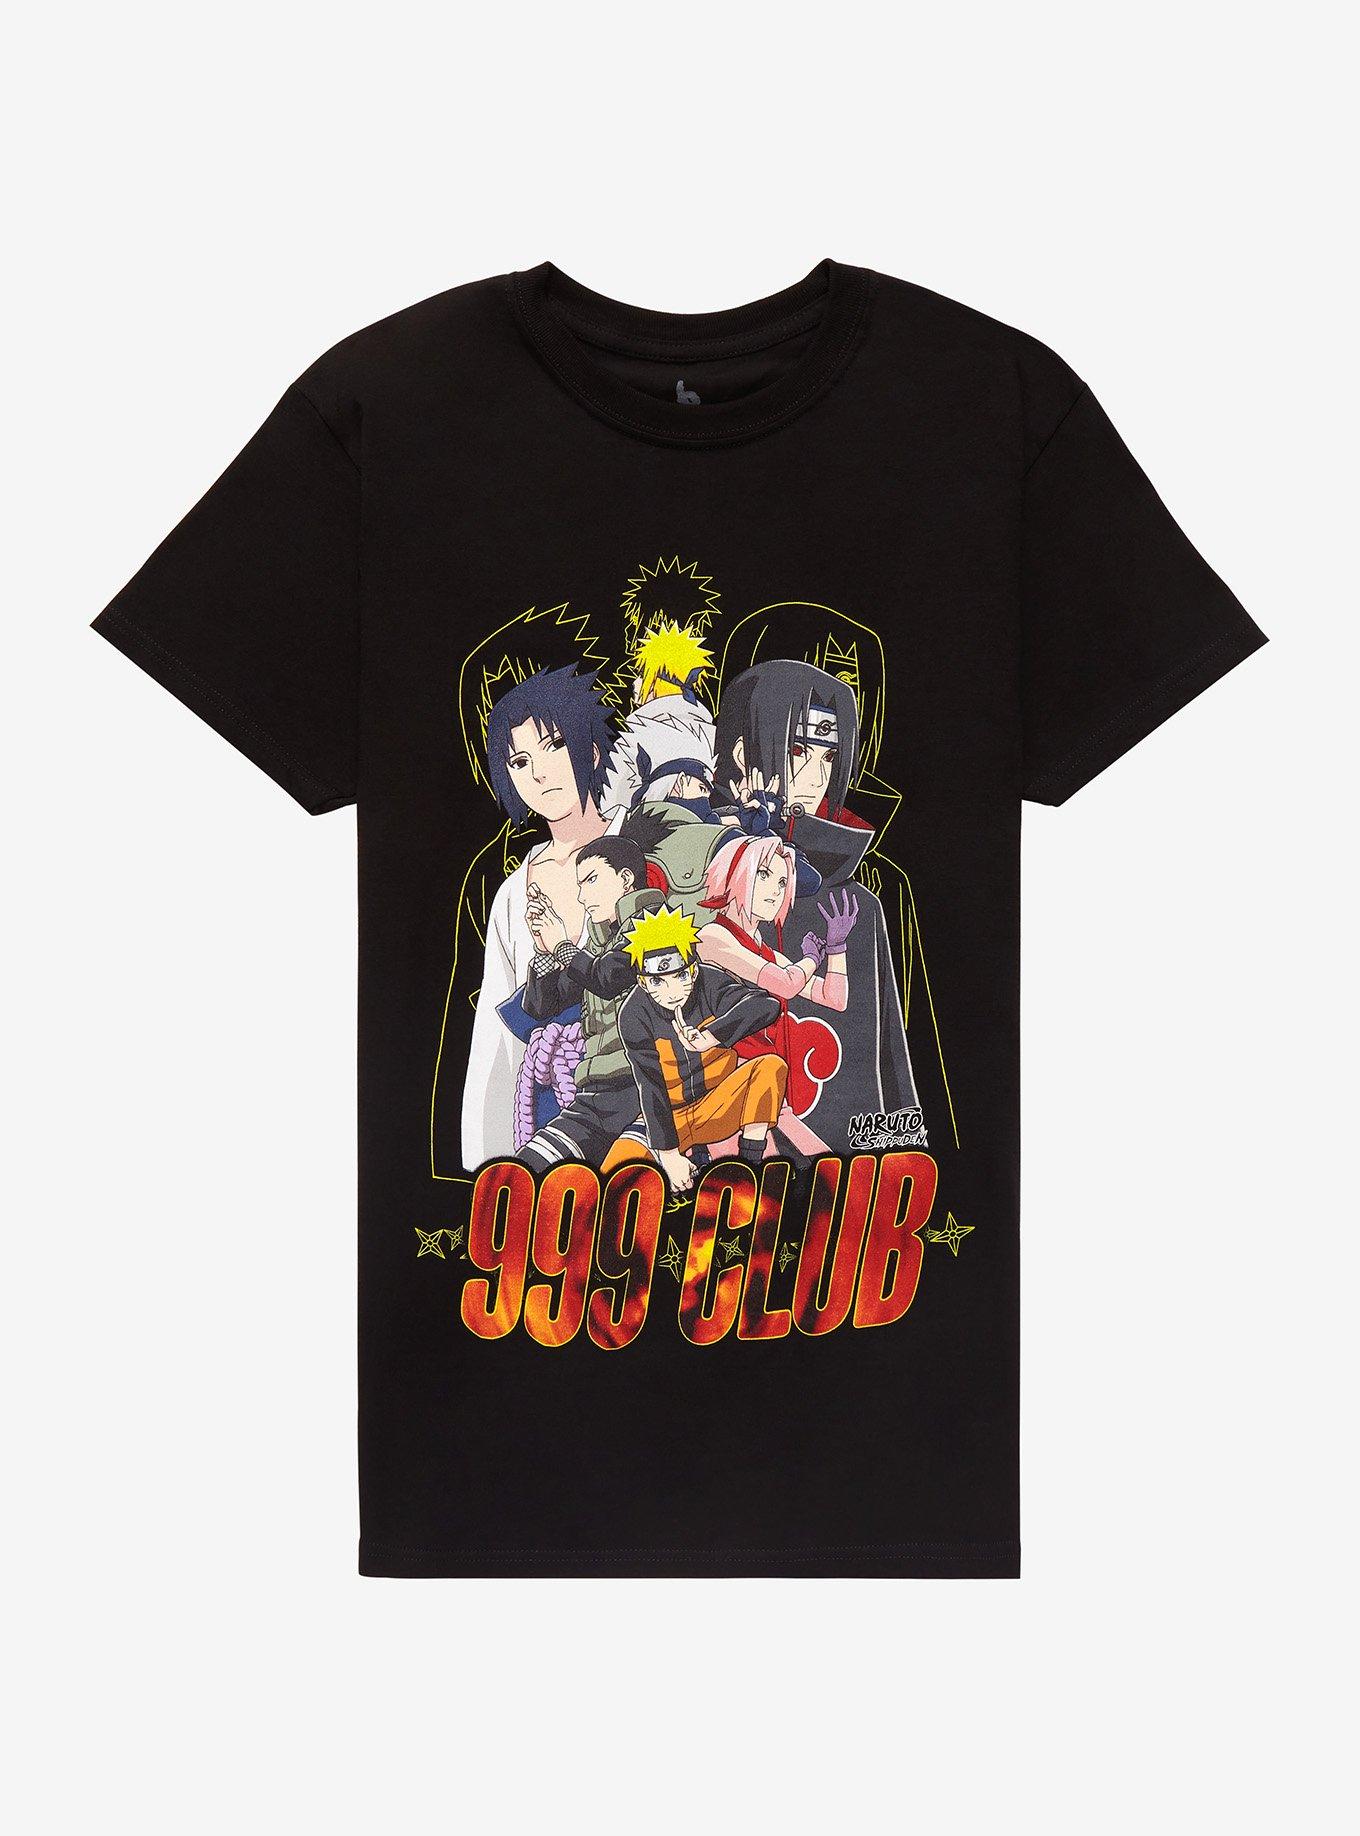 999 By Juice WRLD X Naruto Group T-Shirt Hot Topic Exclusive